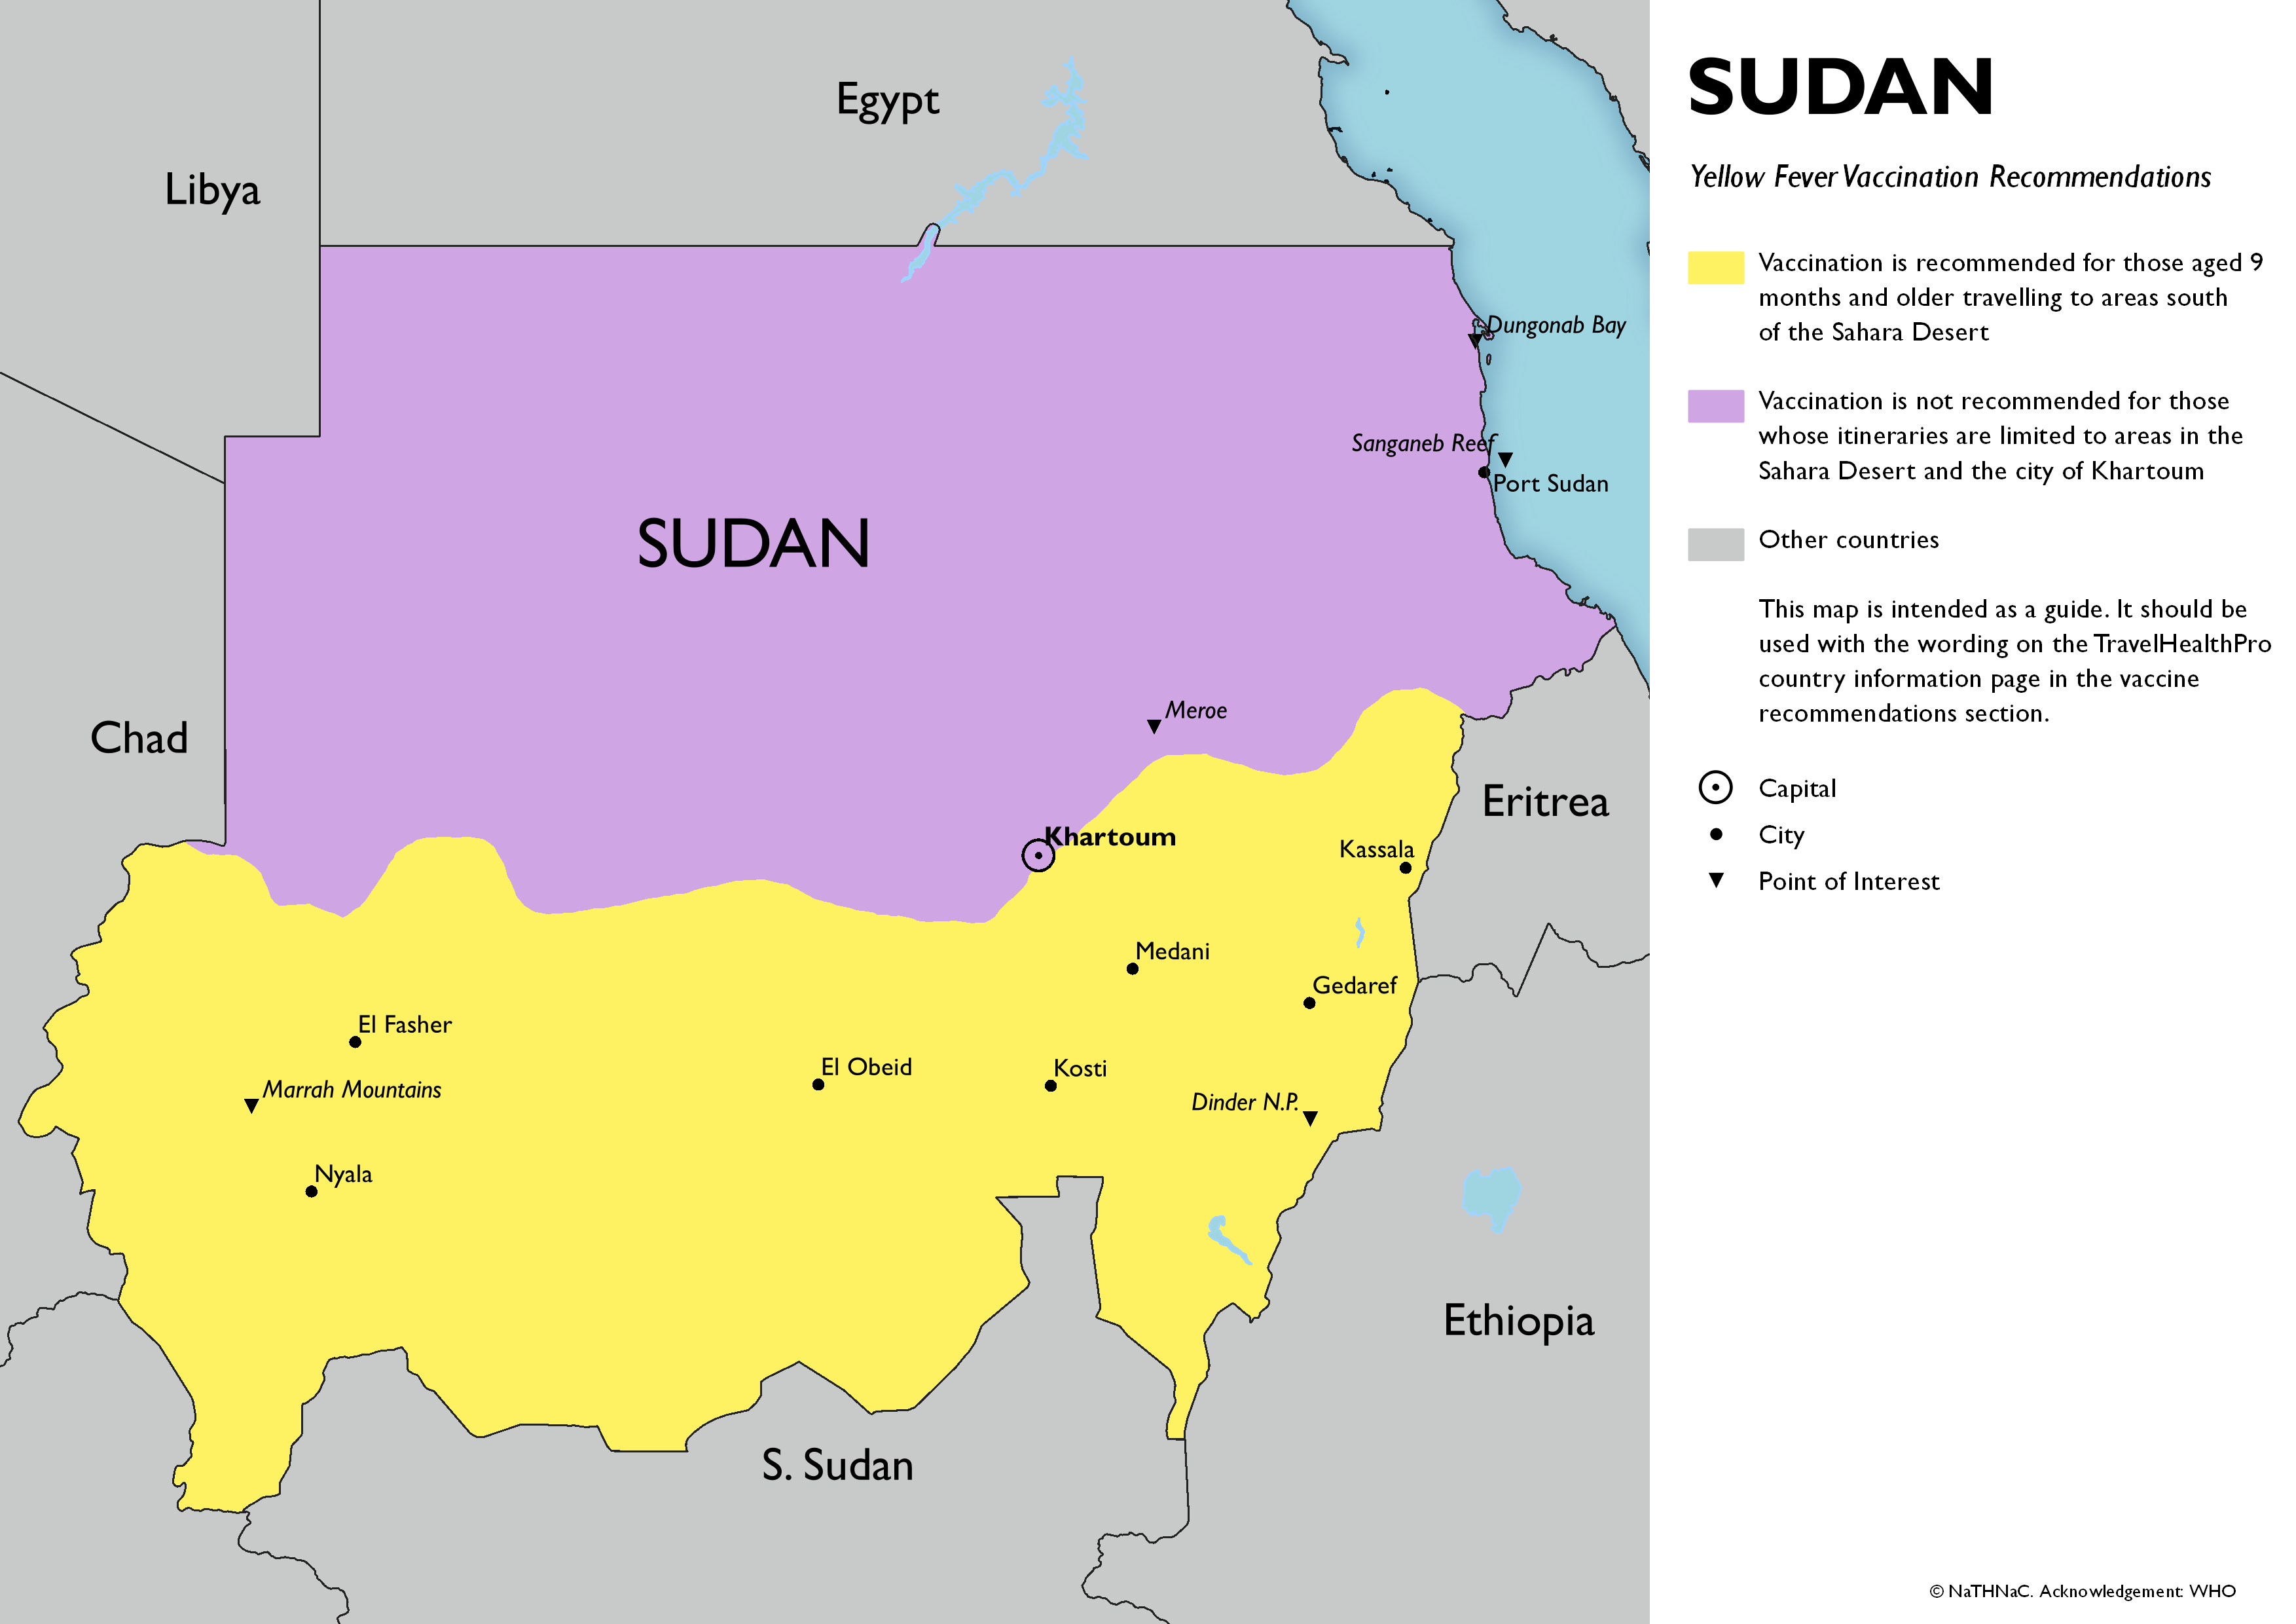 Yellow fever vaccine recommendation map for Sudan